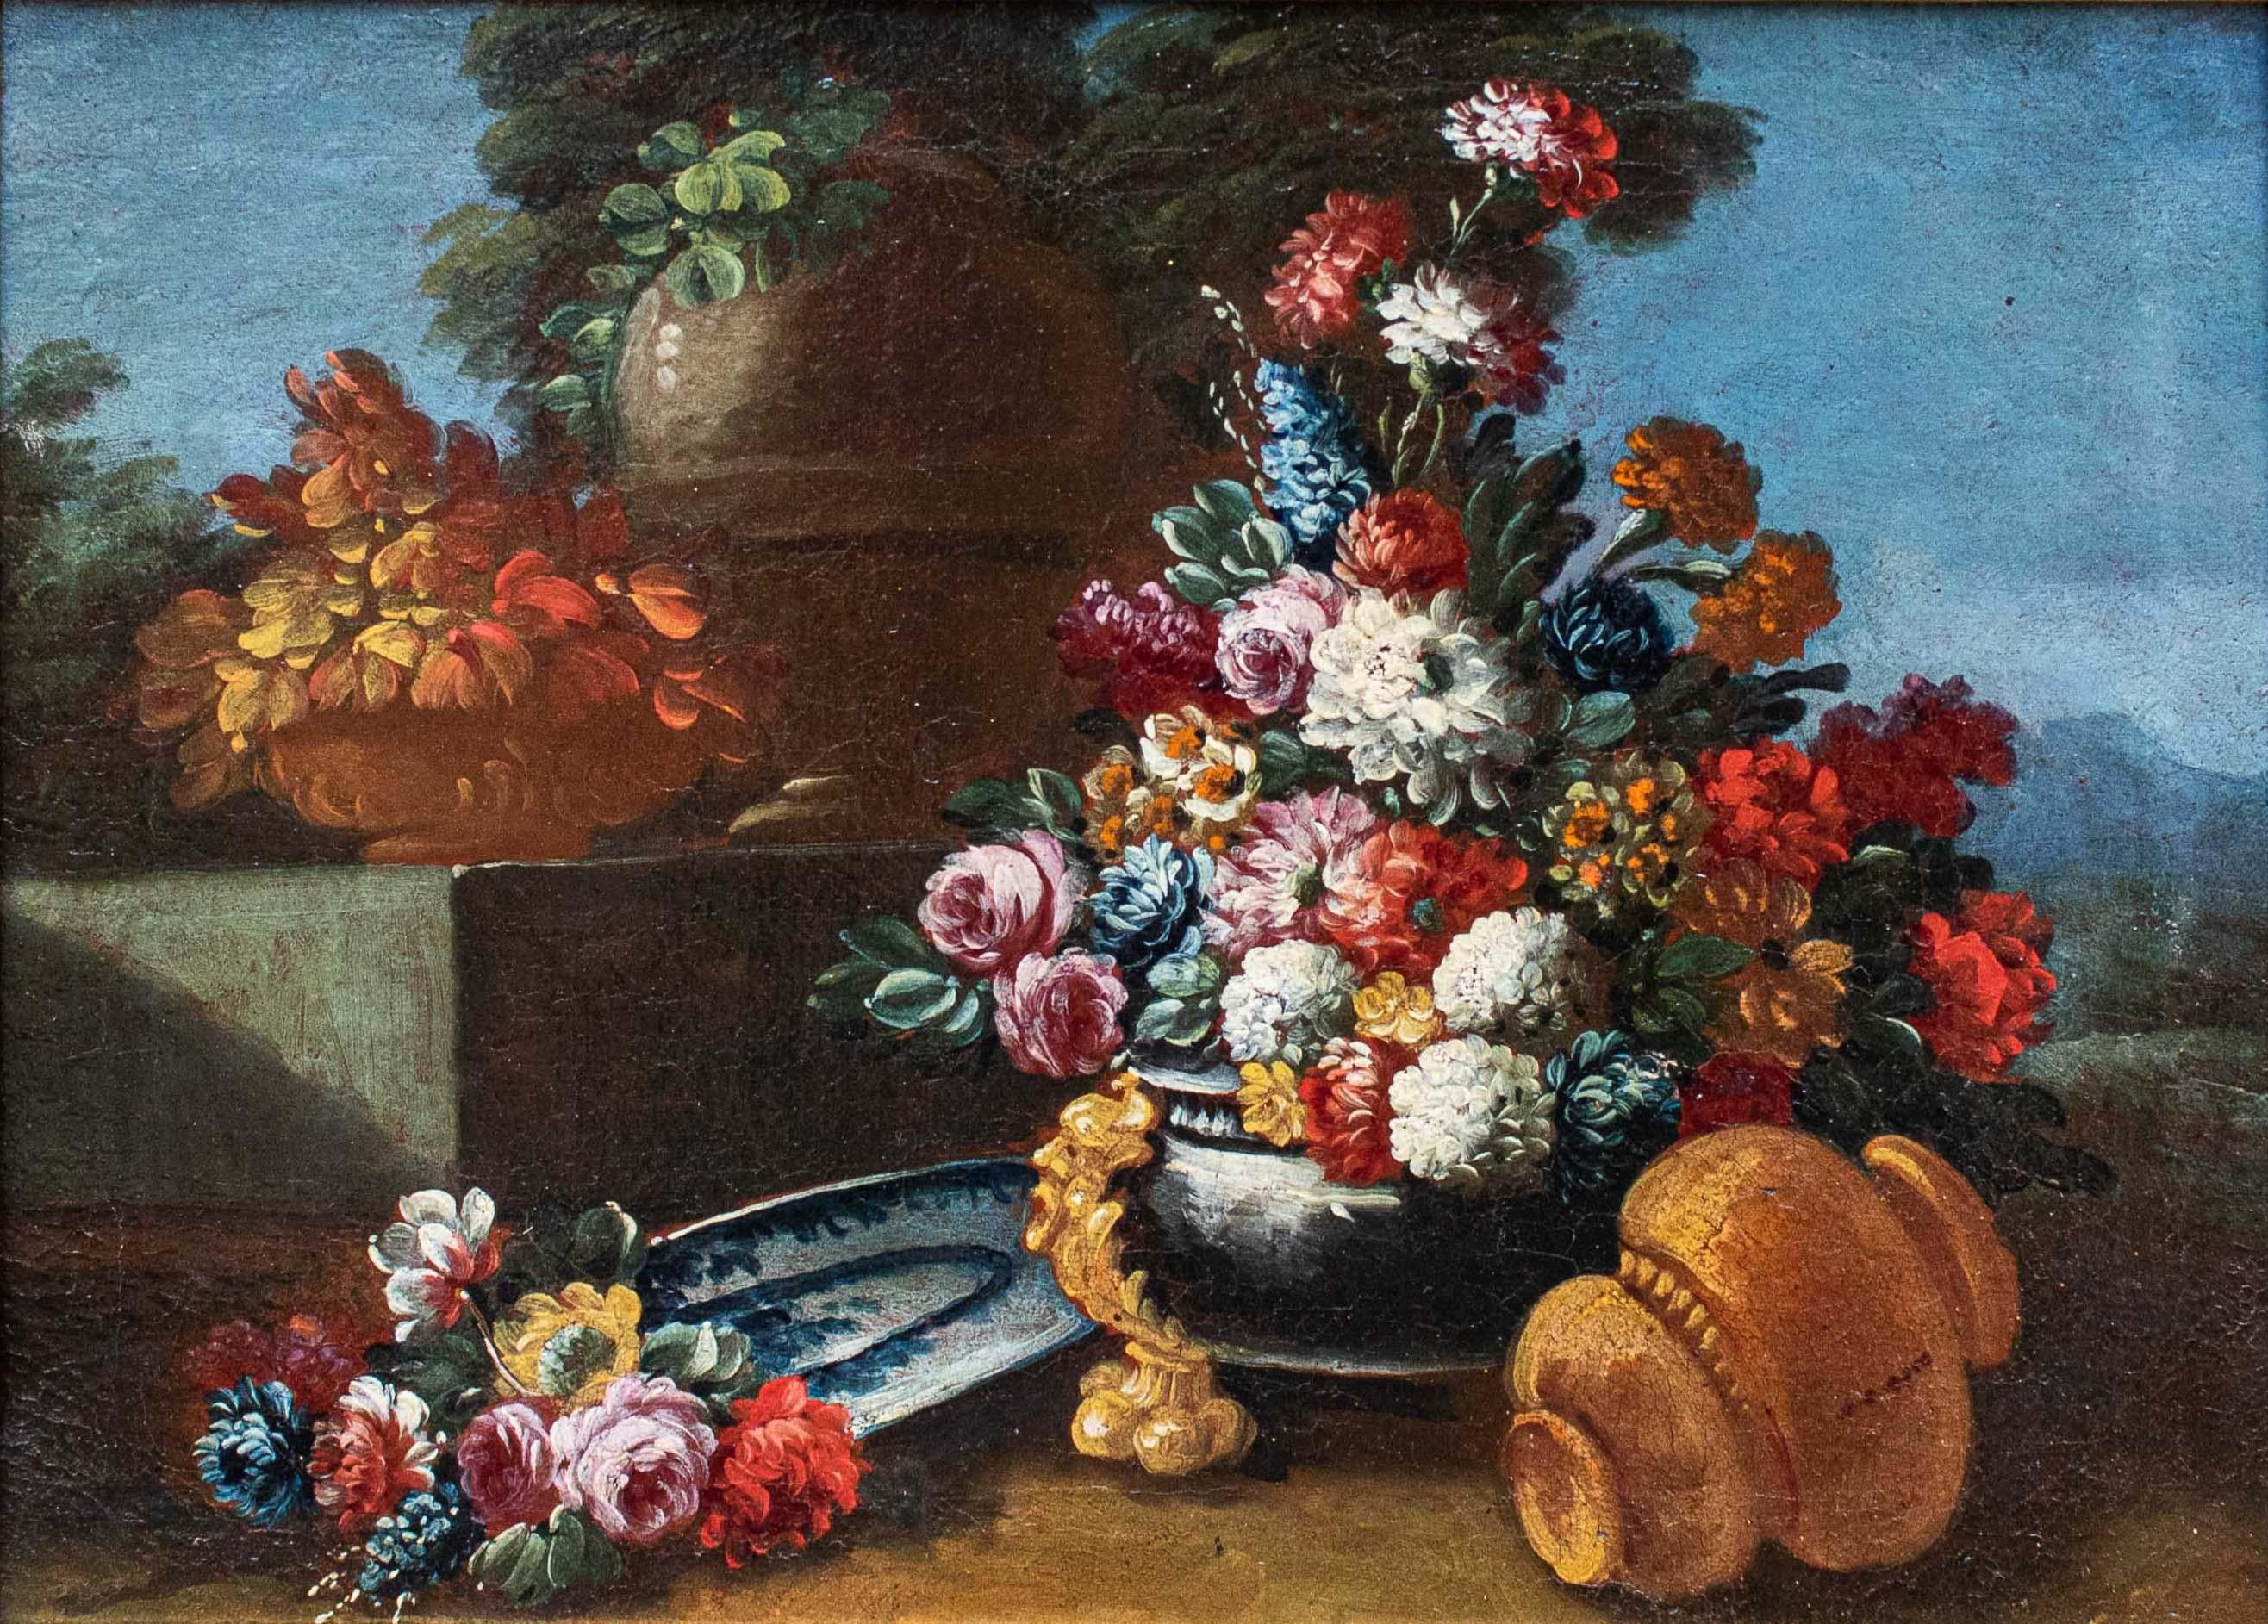 Giacomo Nani (Porto Ercole, 1698 - Naples, 1755)

Still life with flower

Oil on canvas, 30 x 39 cm
Frame 37 x 46 x 3,5

Pupil of Andrea Belvedere and Gaspare Lopez, Nani creates still lifes with a naturalistic heart, in affinity with Tommaso